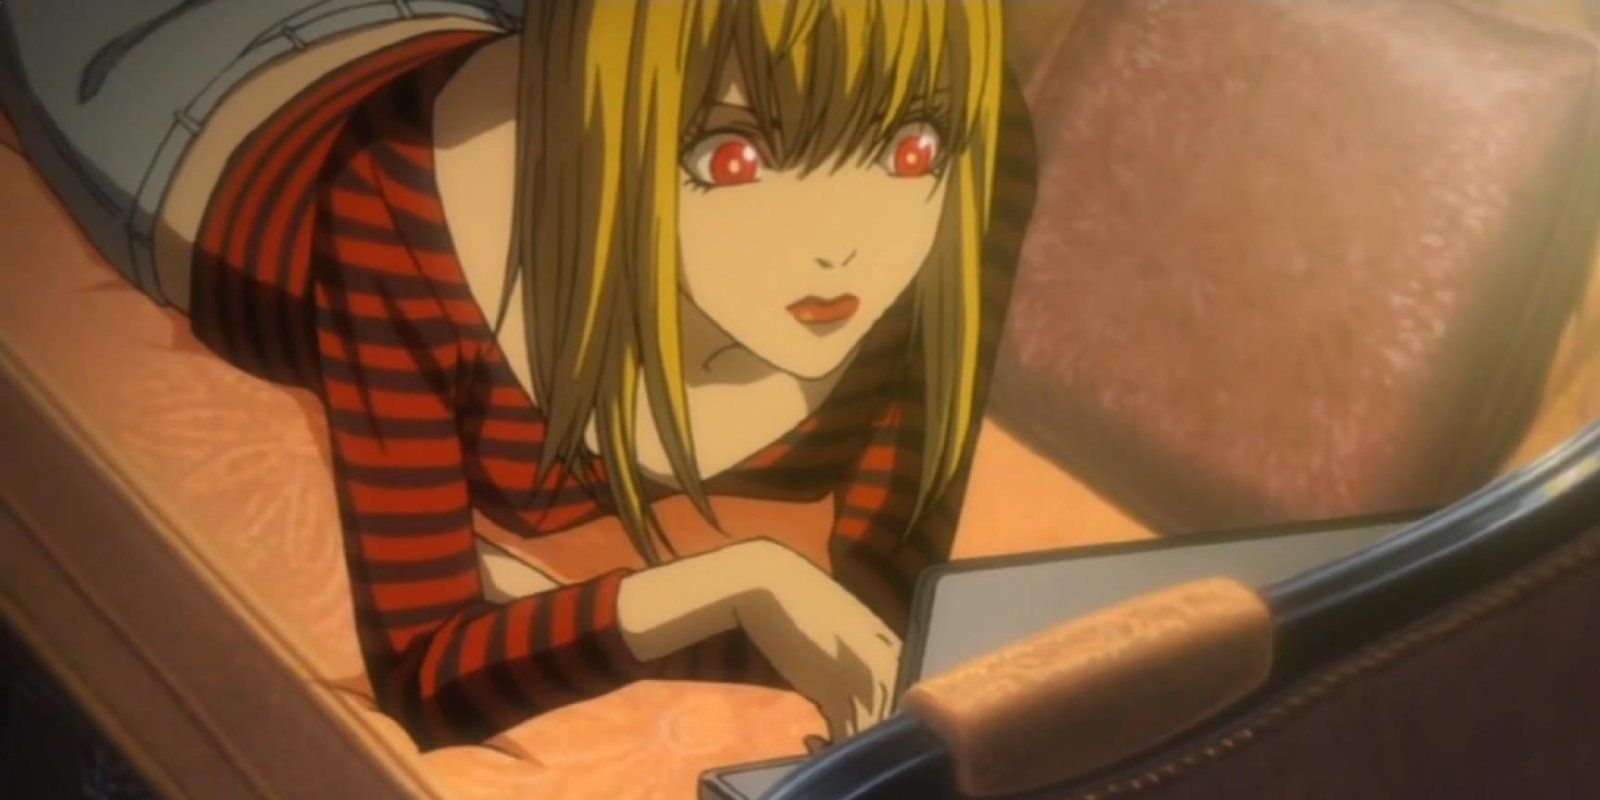 Misa Amane Uses The Shinigami Eyes To Kill People In Death Note